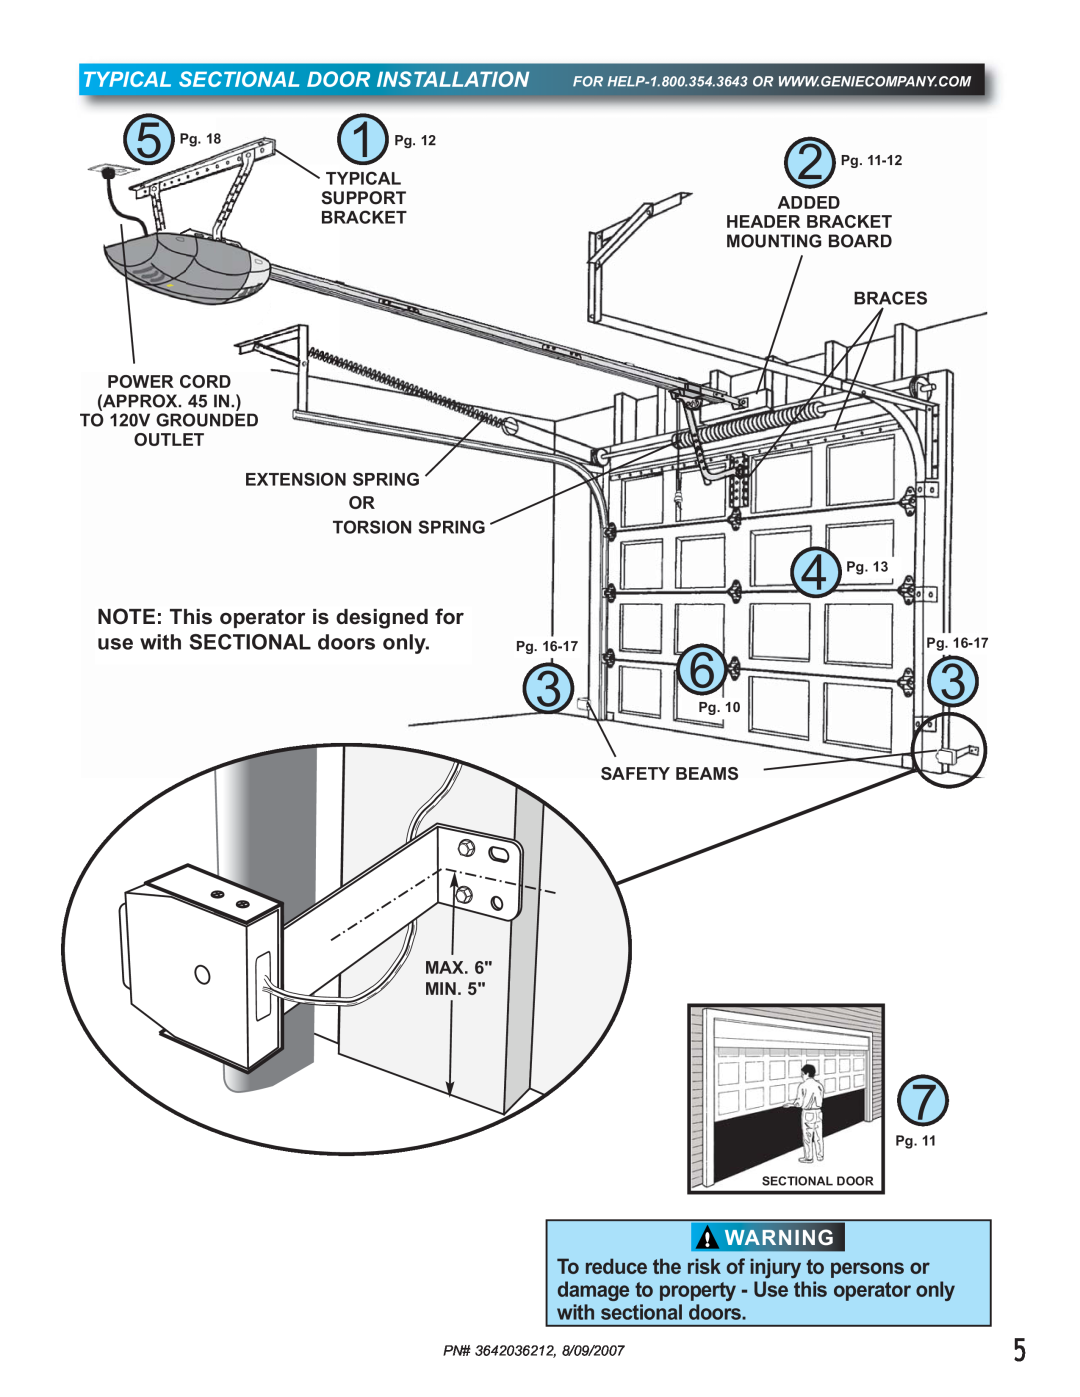 Genie 1022 Typical Sectional Door Installation, NOTE This operator is designed for use with SECTIONAL doors only, Support 